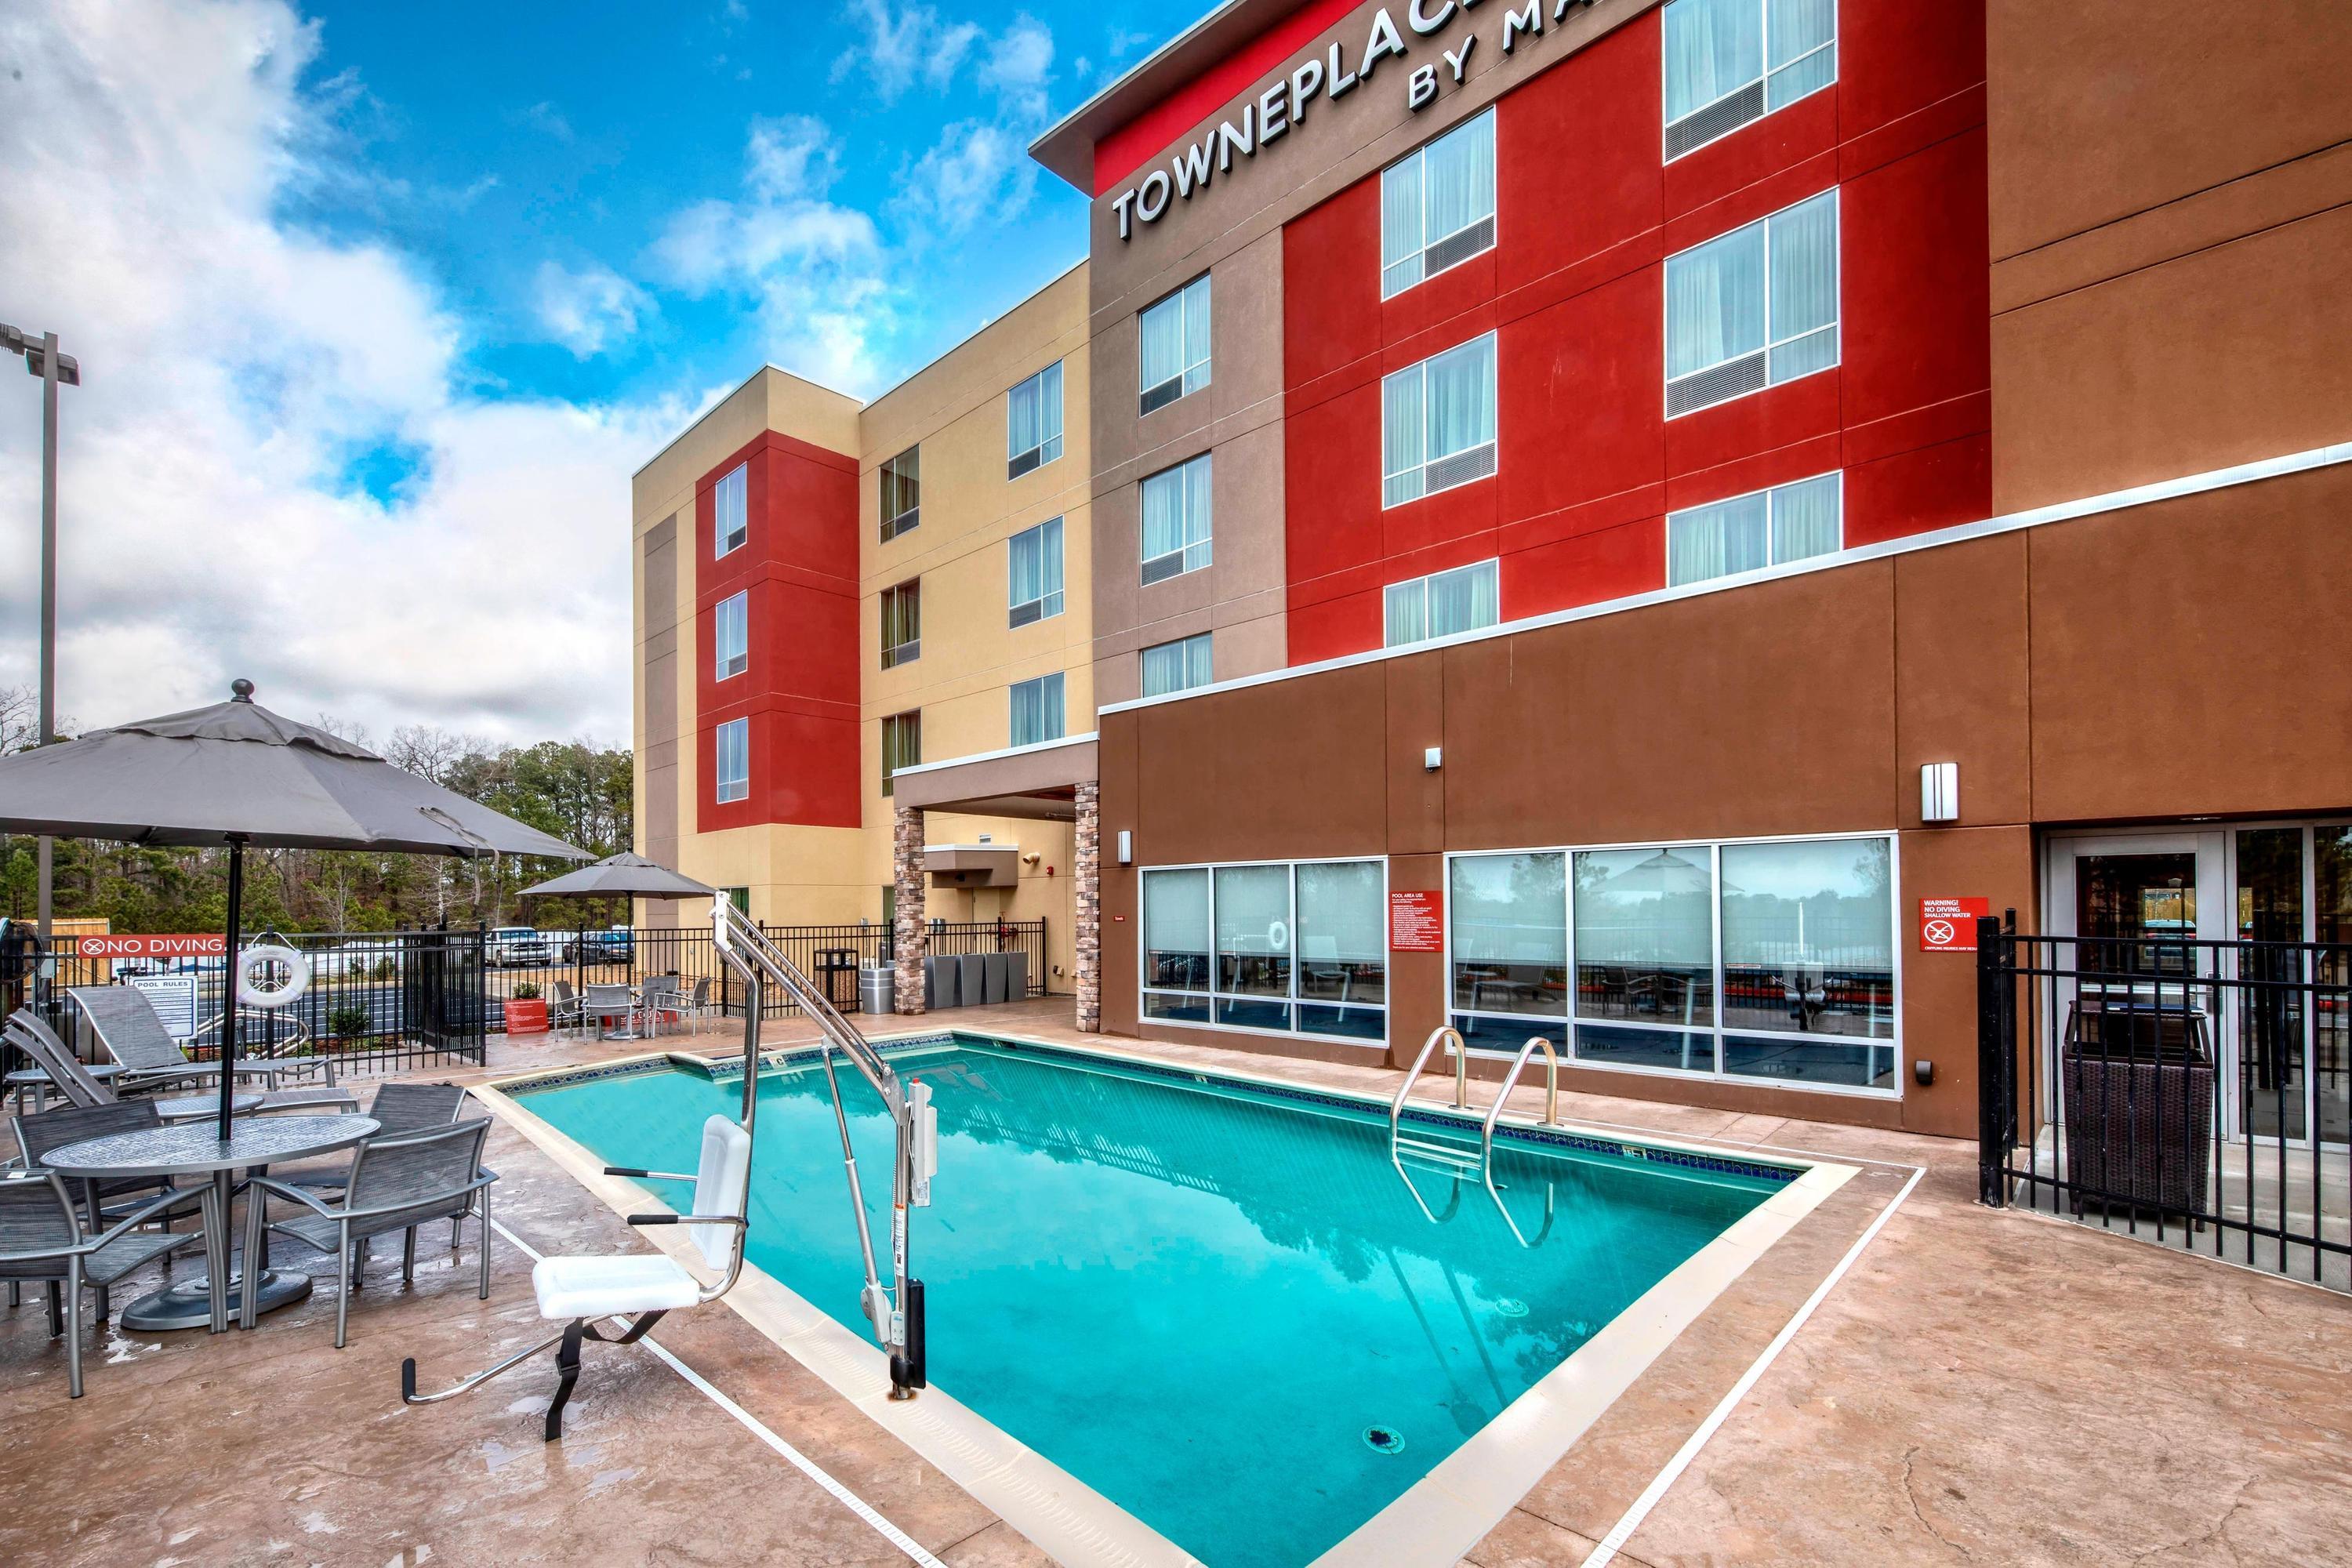 Pool view of TownePlace Suites by Marriott Hot Springs